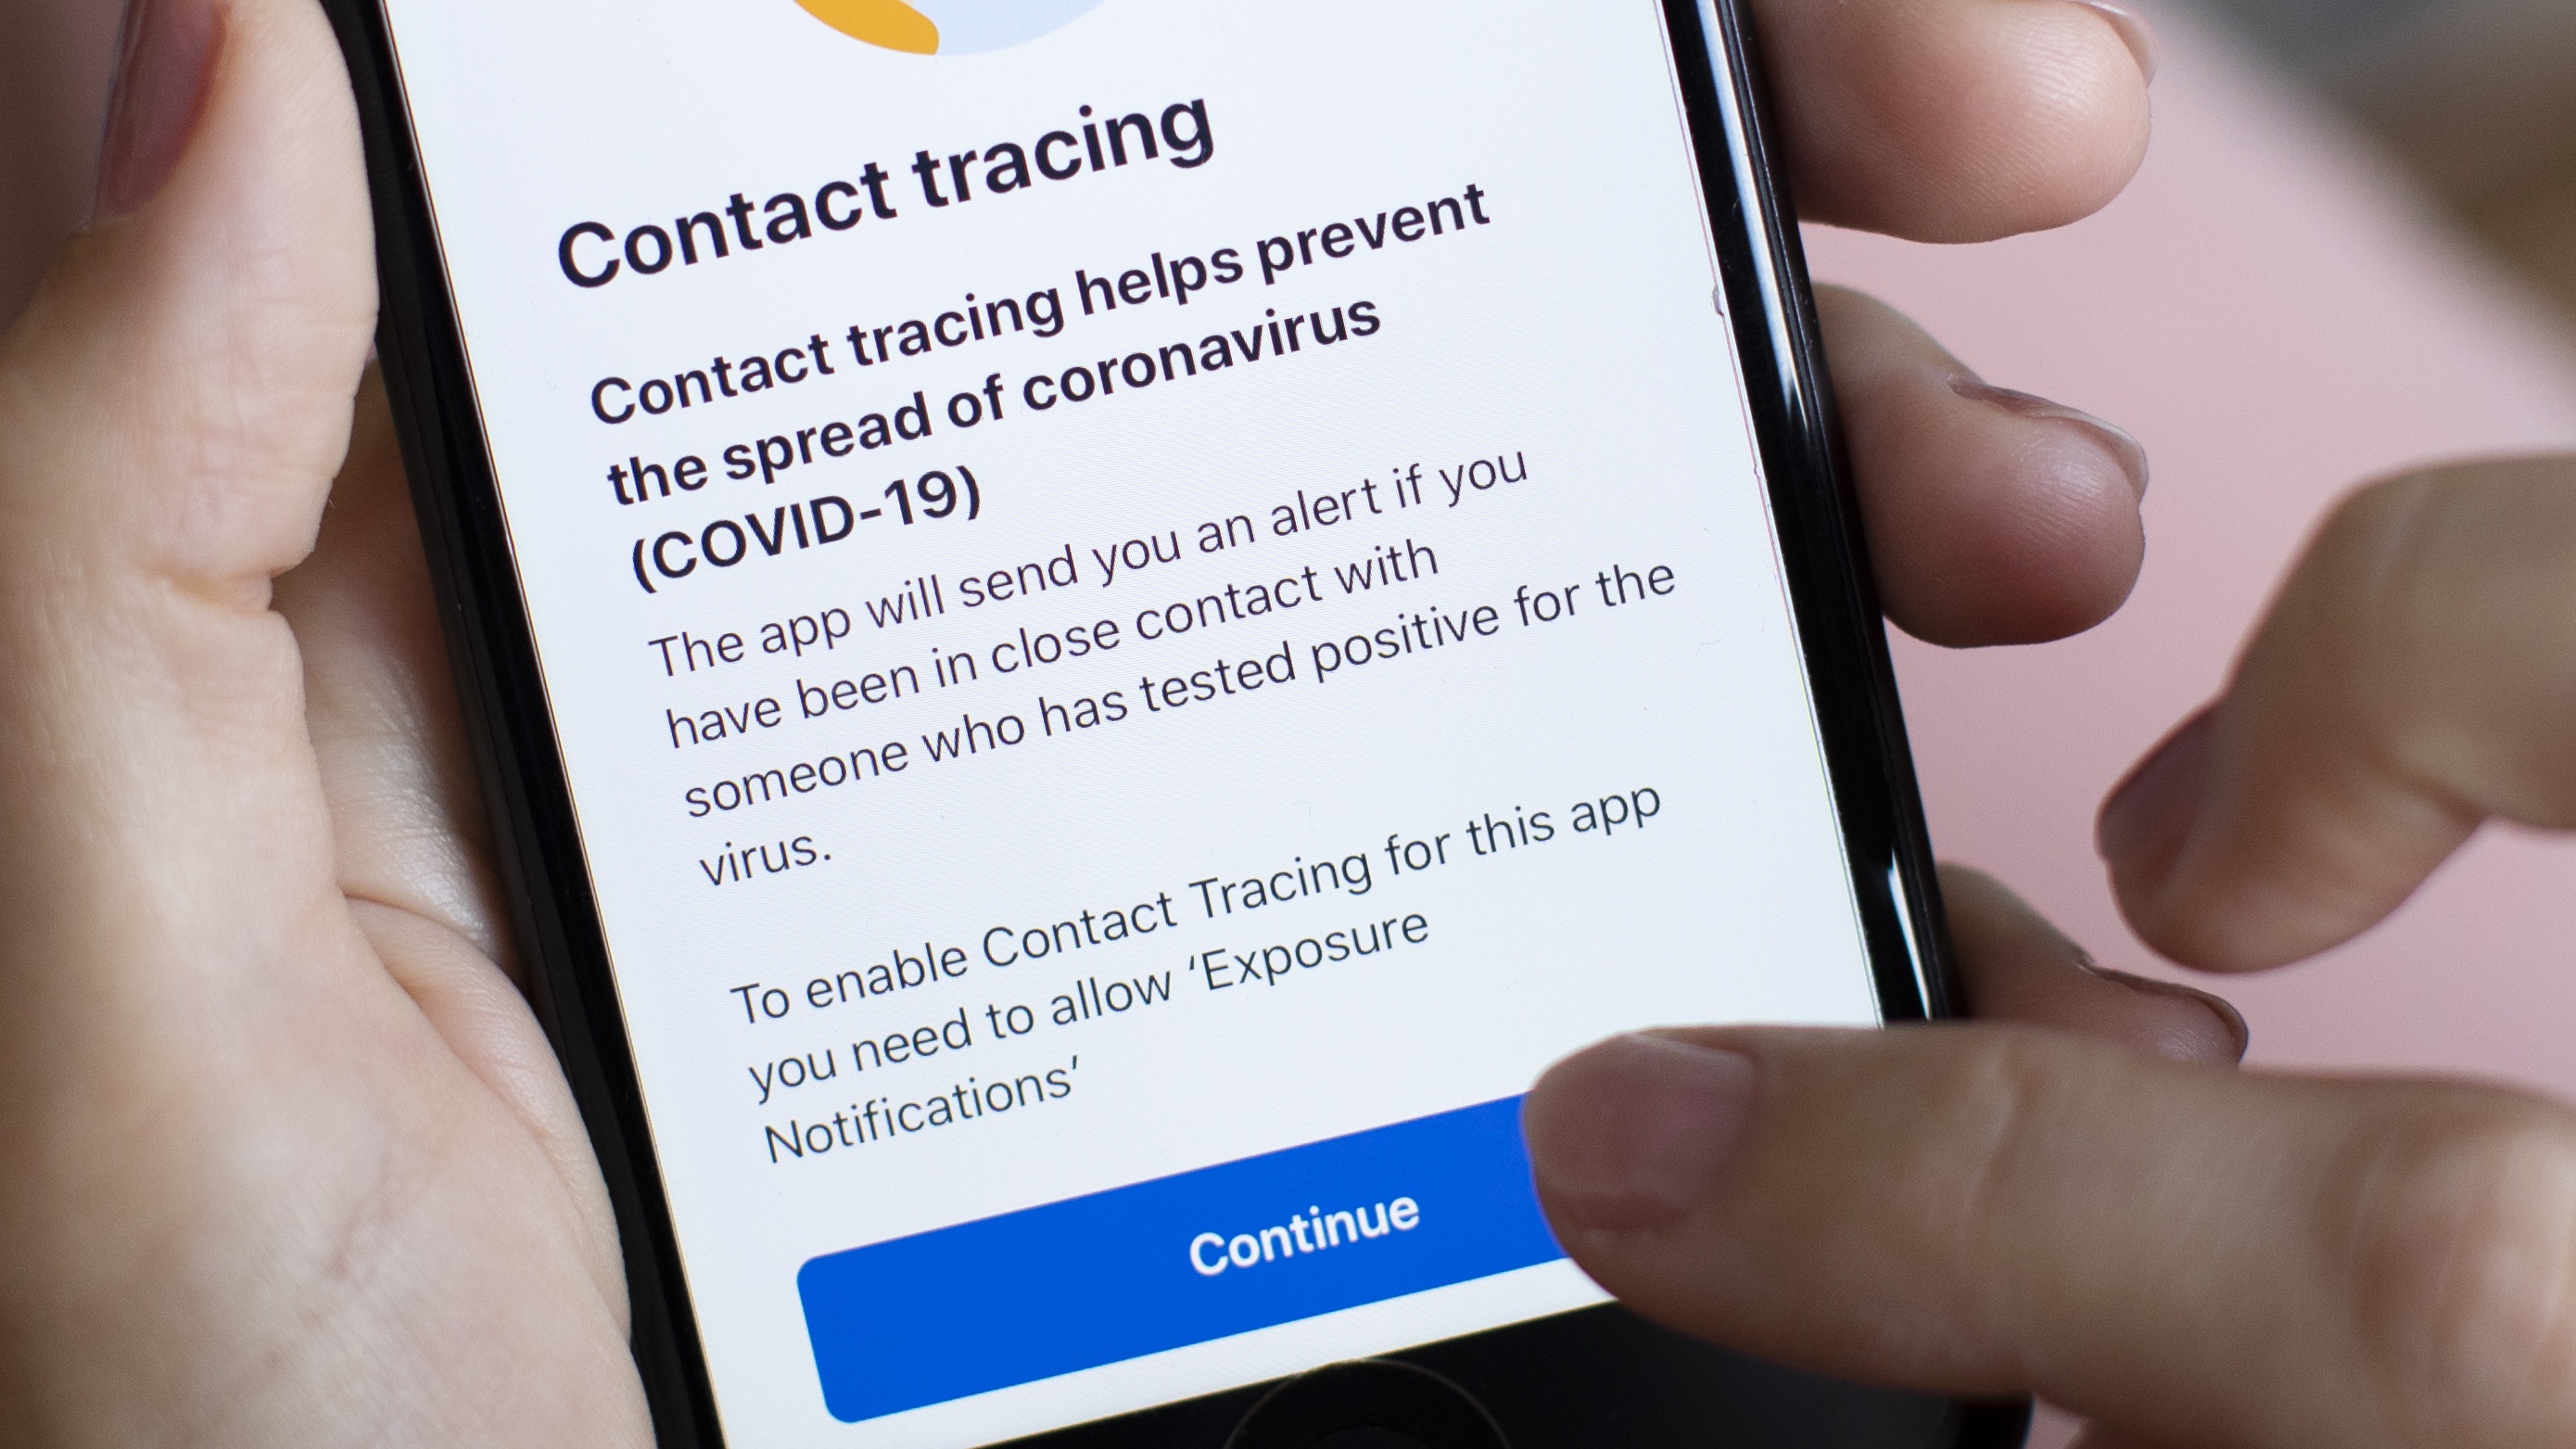 The NHS track-and-trace app